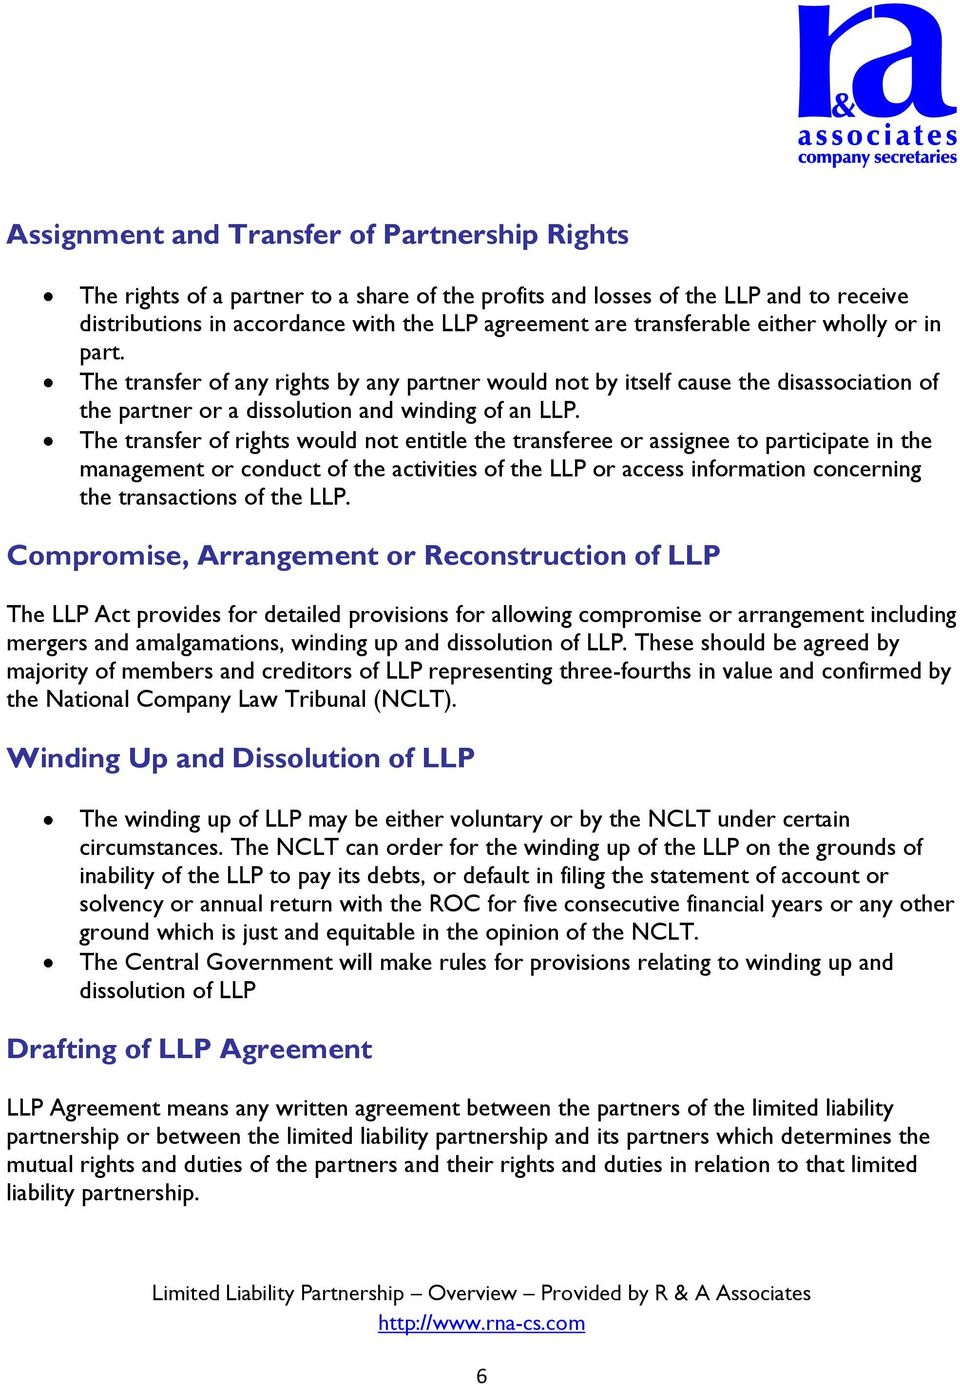 The transfer of rights would not entitle the transferee or assignee to participate in the management or conduct of the activities of the LLP or access information concerning the transactions of the